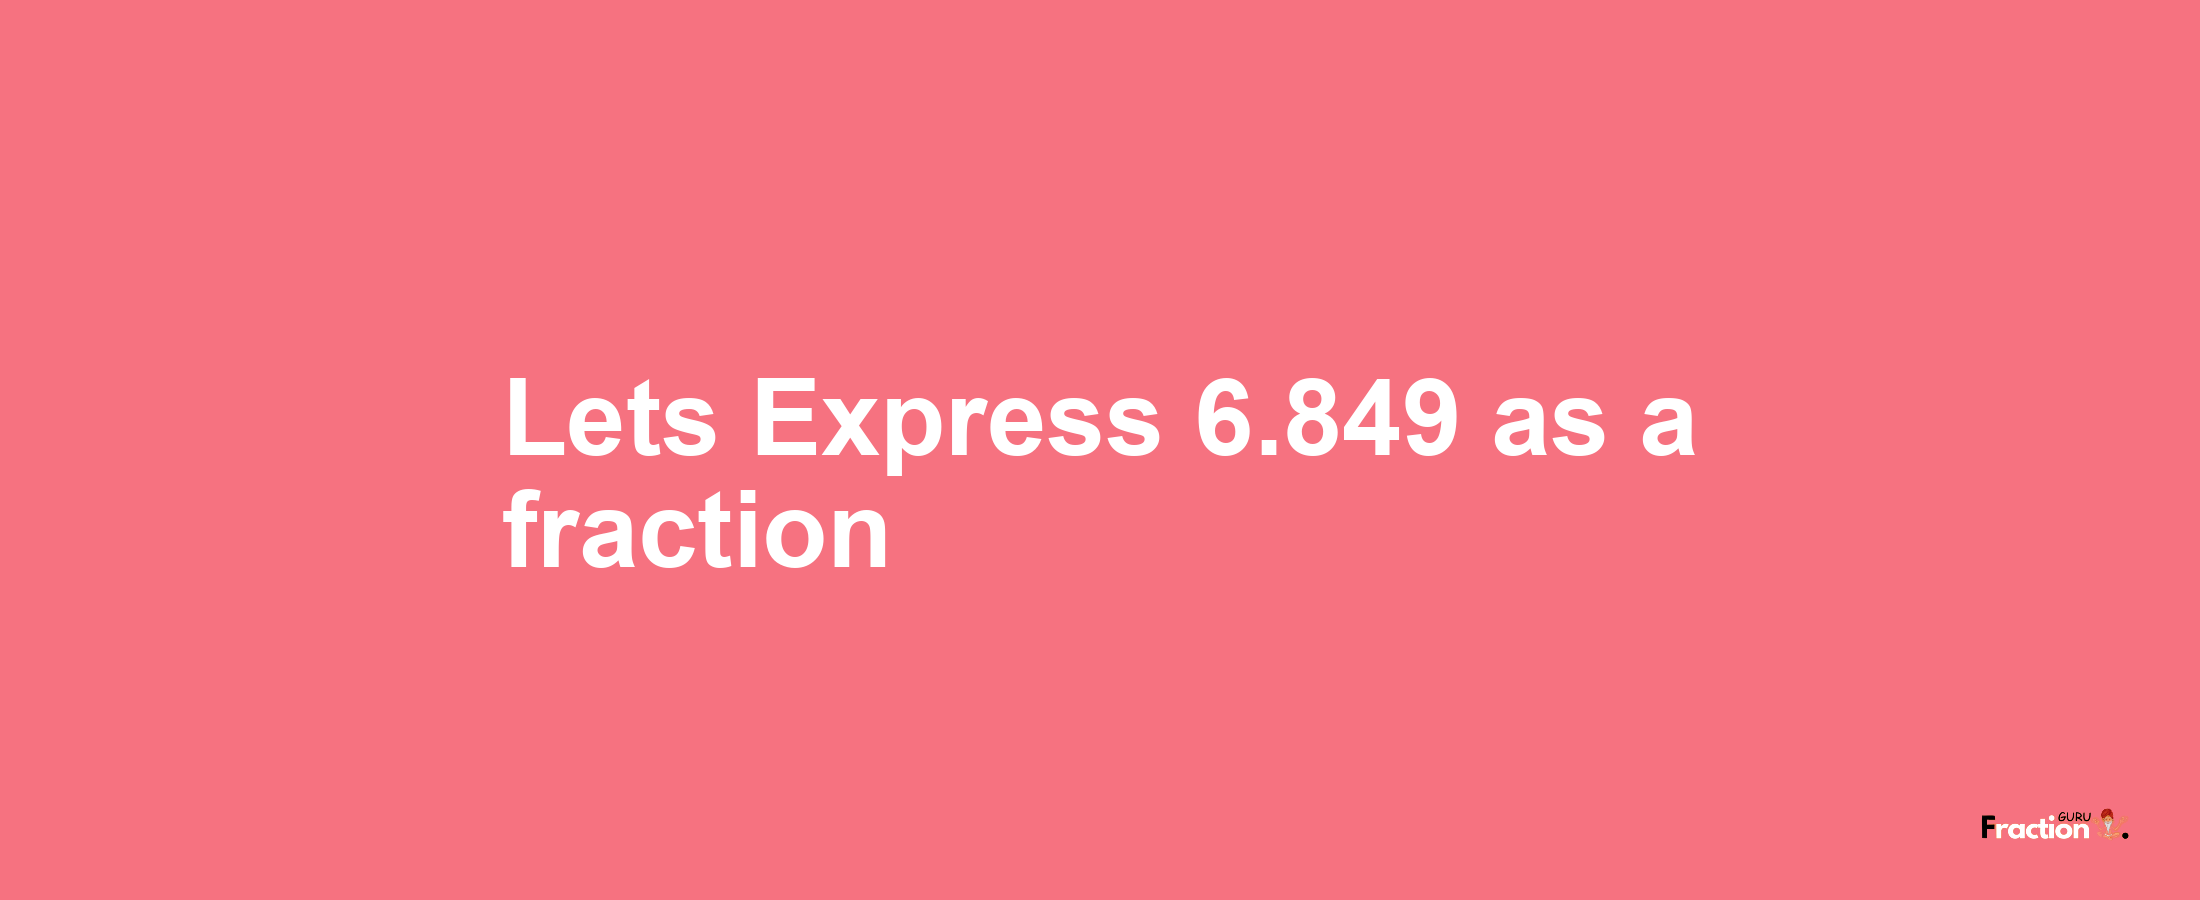 Lets Express 6.849 as afraction